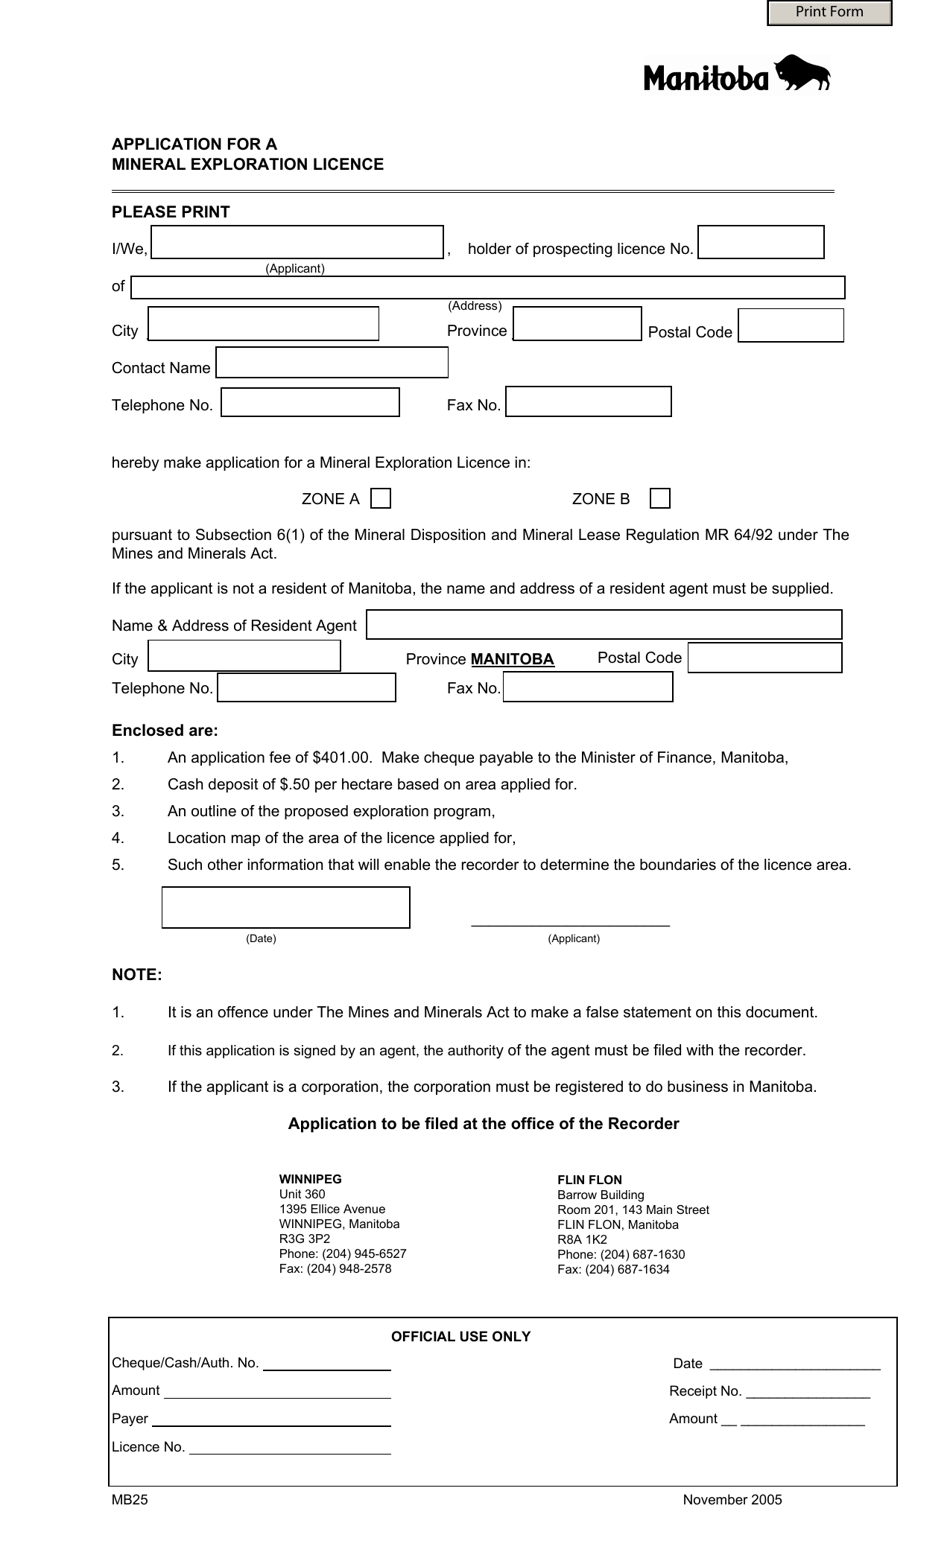 Form MB25 Application for a Mineral Exploration Licence - Manitoba, Canada, Page 1